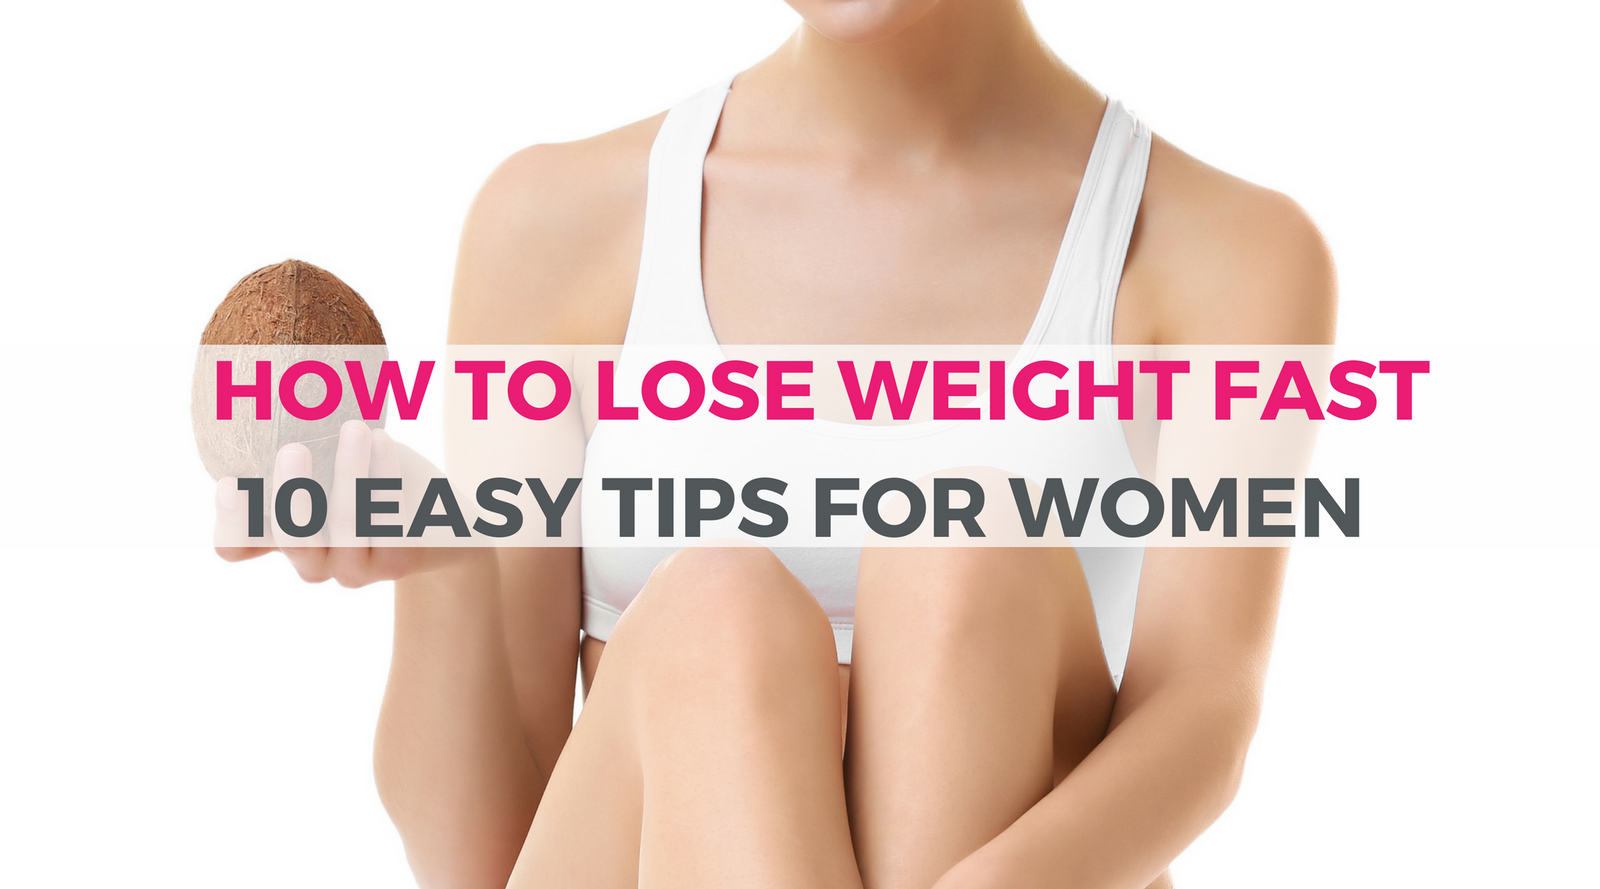 FAST WEIGHT LOSS FOR WOMEN: Fat Loss Tricks to Boost Metabolism and Lose  Weight fast, Lose up to 10 Pounds in a Week (Best weight loss diet plan and